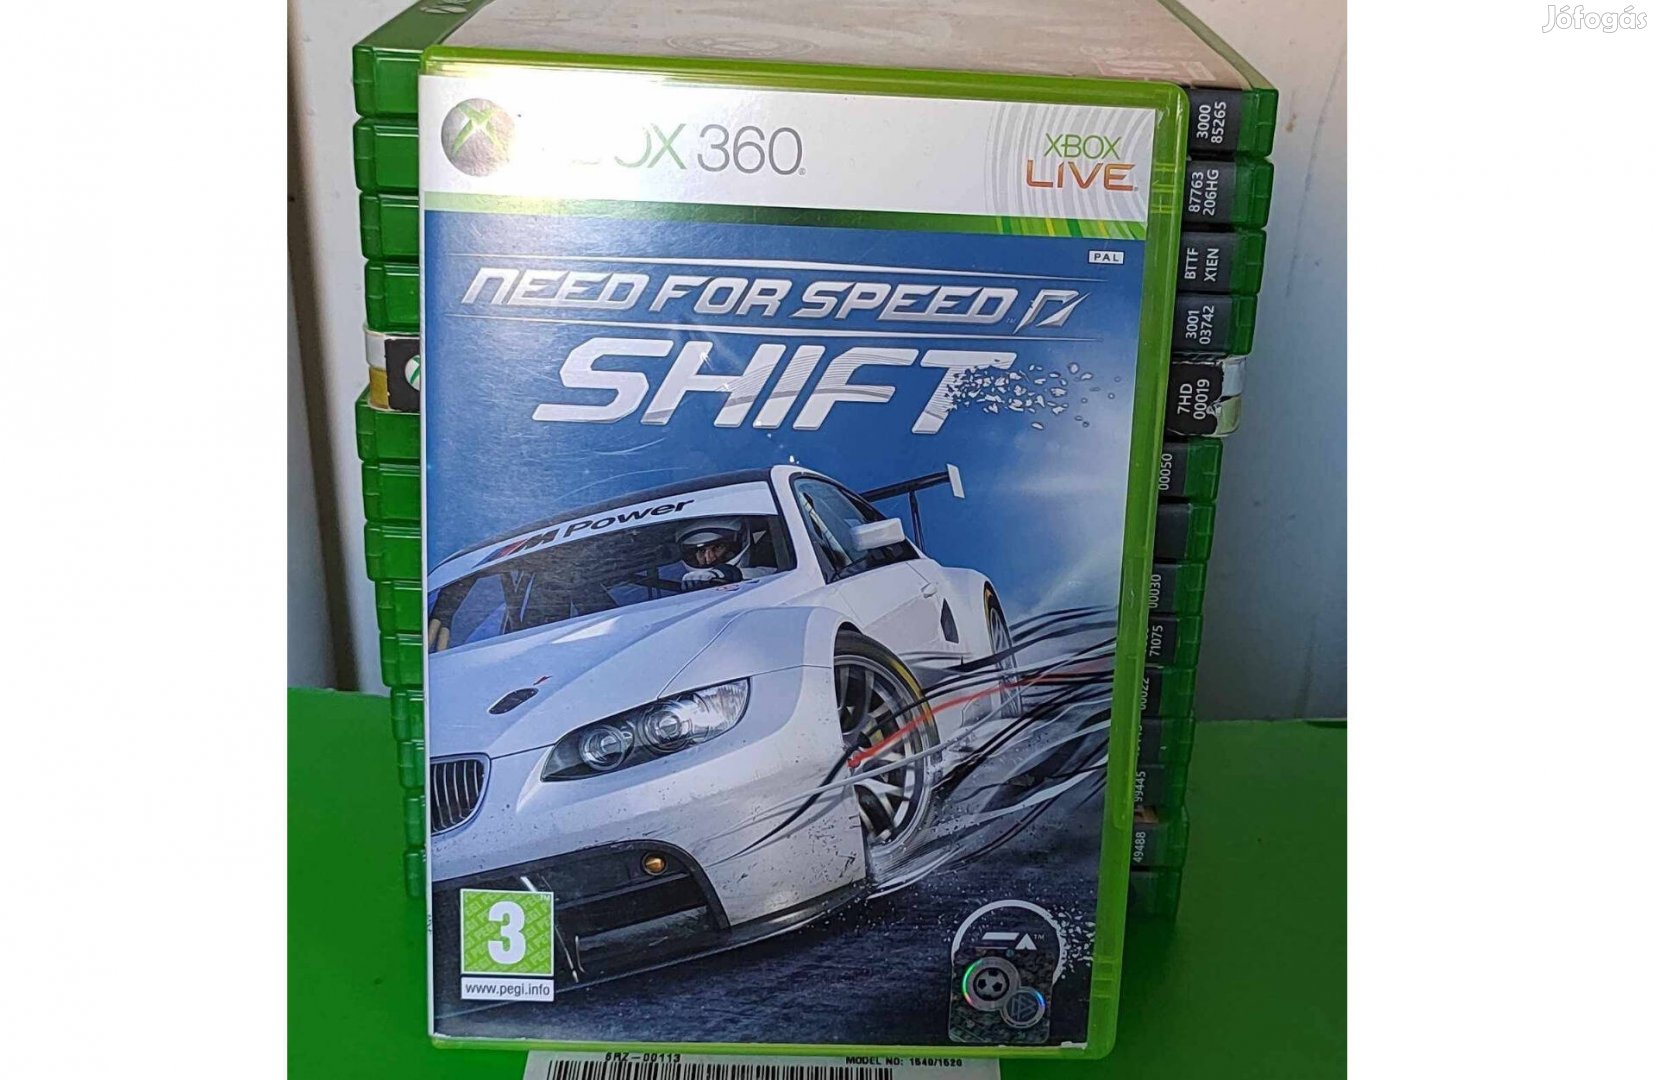 Xbox 360 Need for Speed Shift